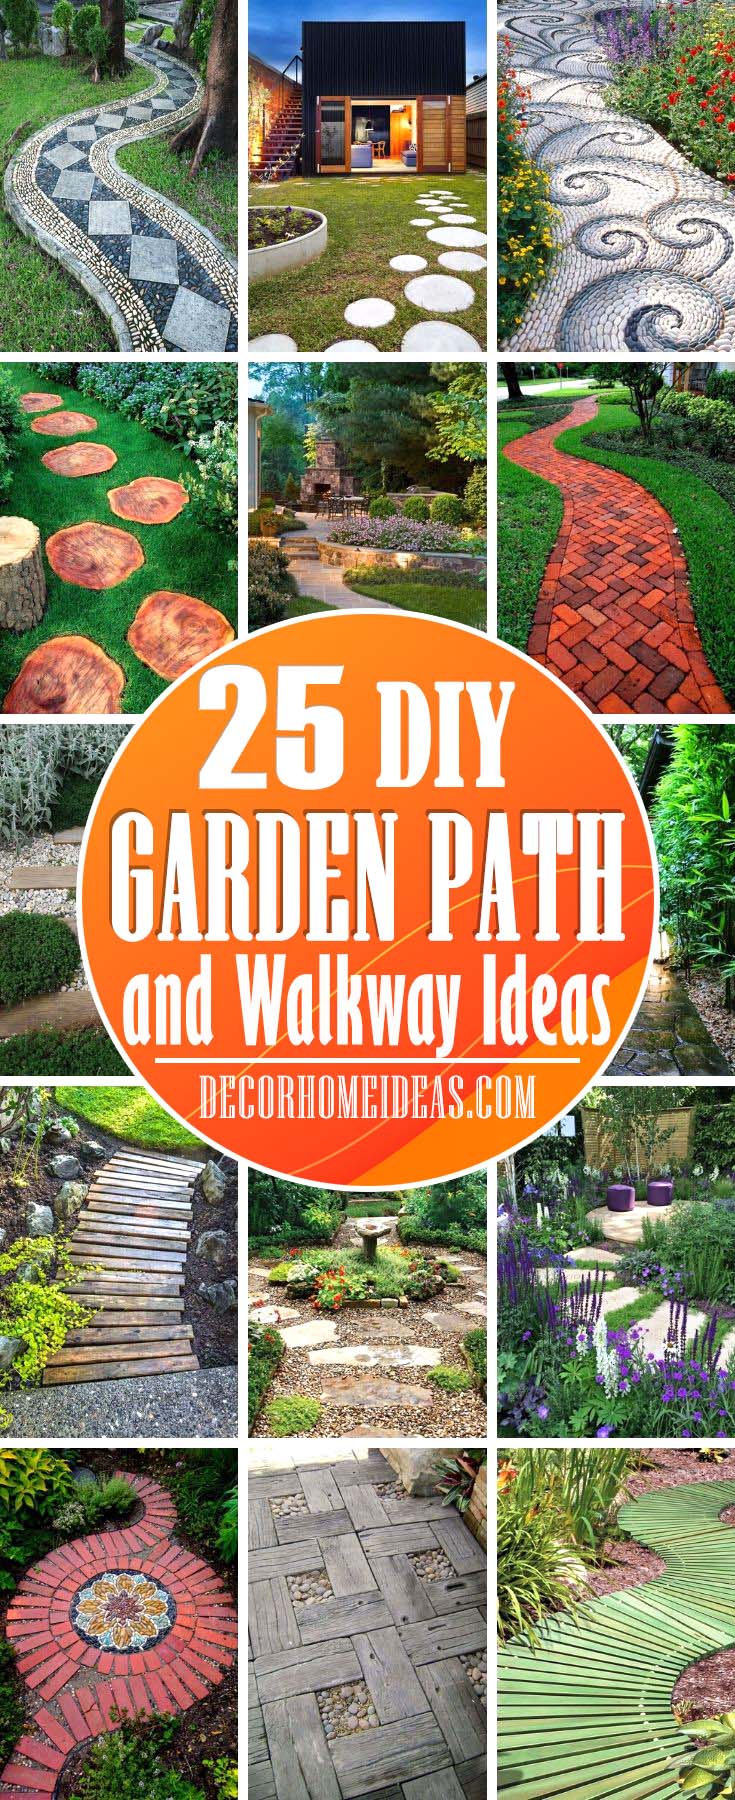 DIY Beautiful Garden Path Walkway Ideas. These are our favorite walkway ideas for your landscape: Budget-friendly paths you can build in a weekend without breaking your back. #diy #garden #path #walkway #decorhomeideas